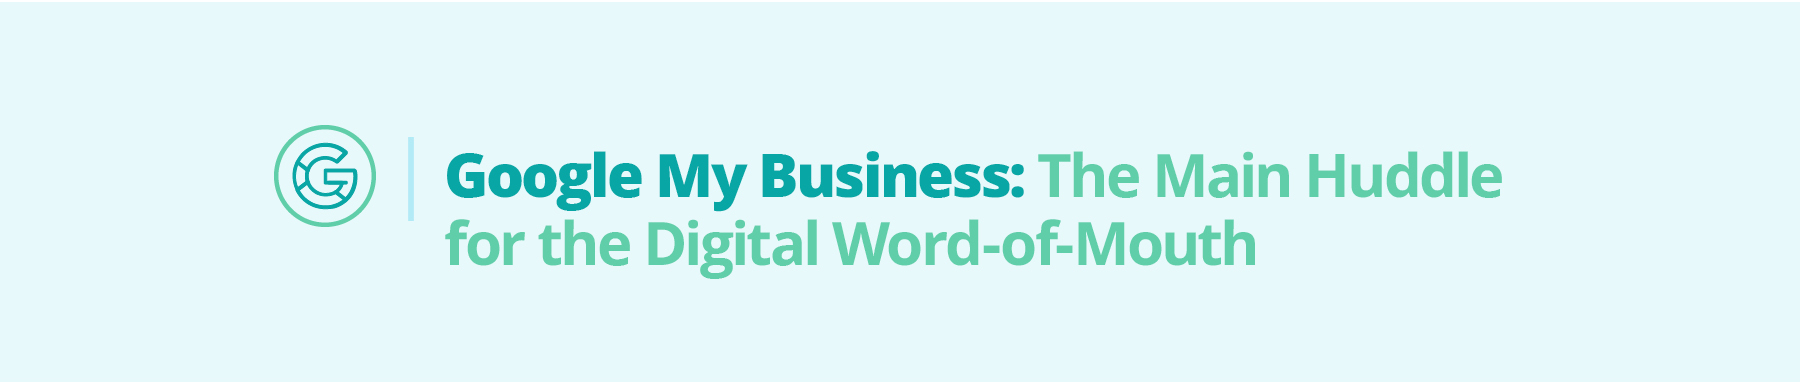 Google My Business: The Main Huddle for the Digital Word-of-Mouth